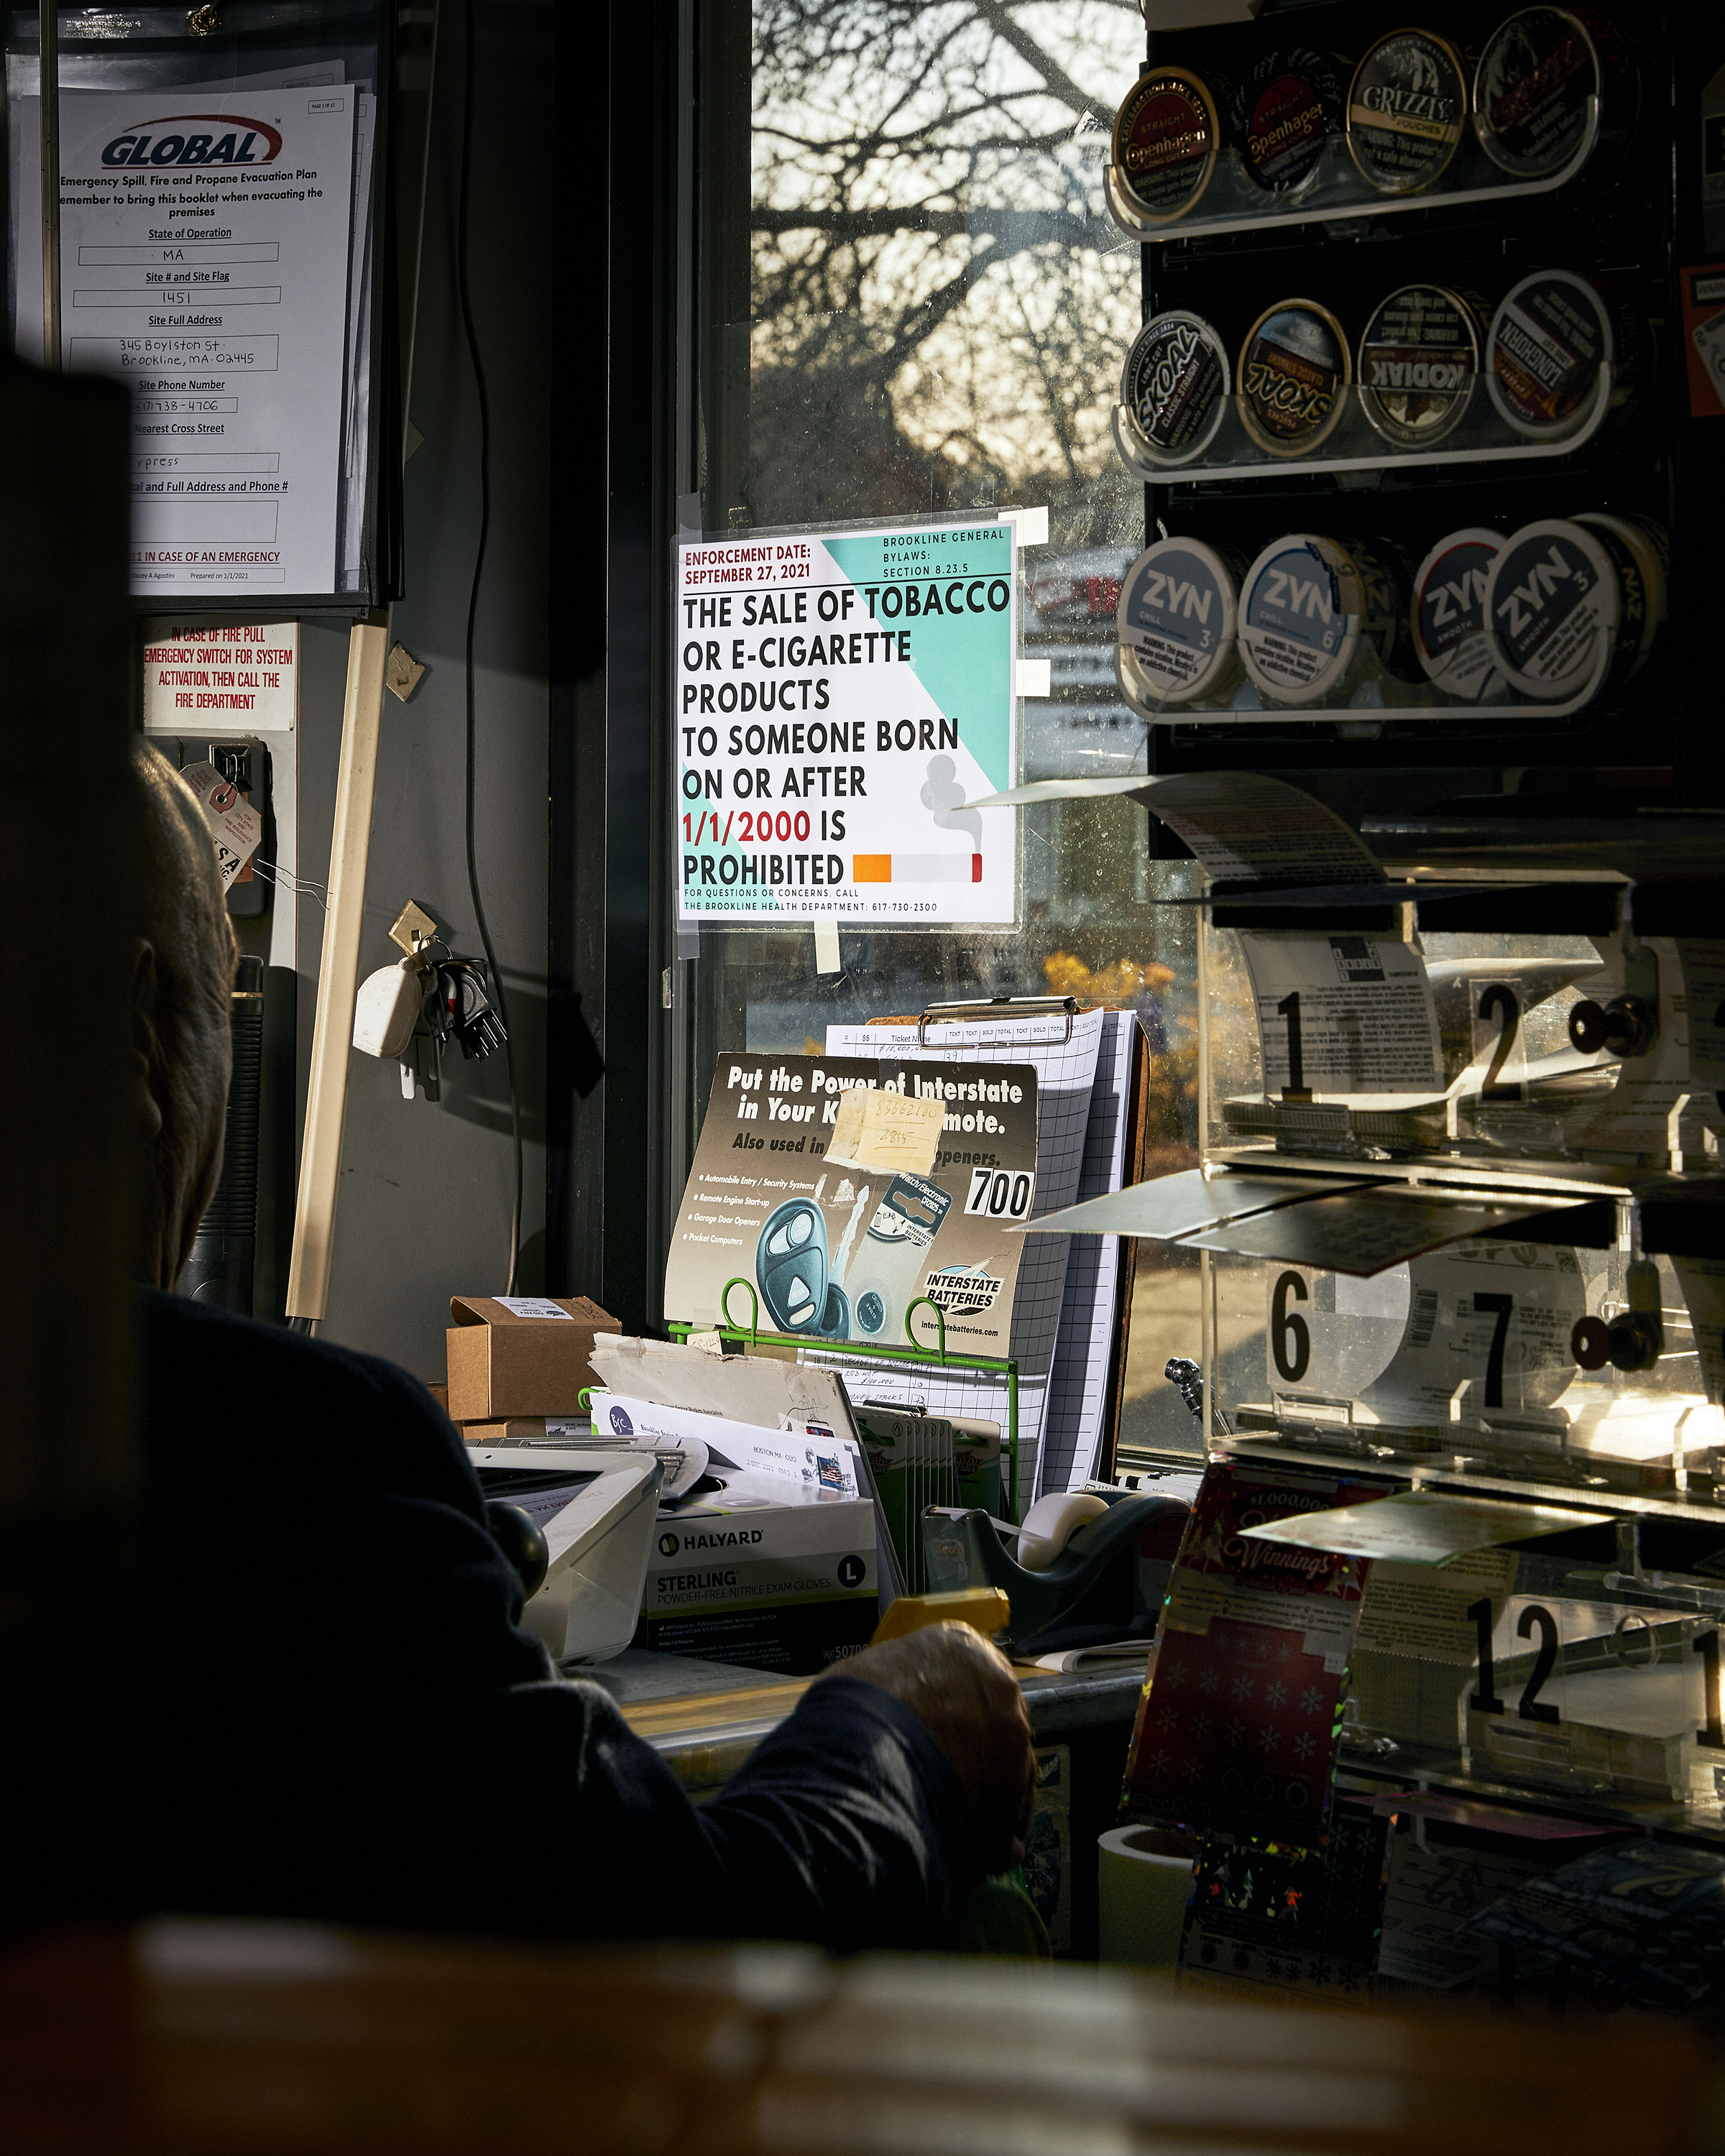 Elias Audy is one of several convenience store owners suing Brookline over its tobacco-free generation policy. He is photographed inside his Village Mobil store, where a sign displays information about the new tobacco ban. (Cody O'Loughlin for TIME.)